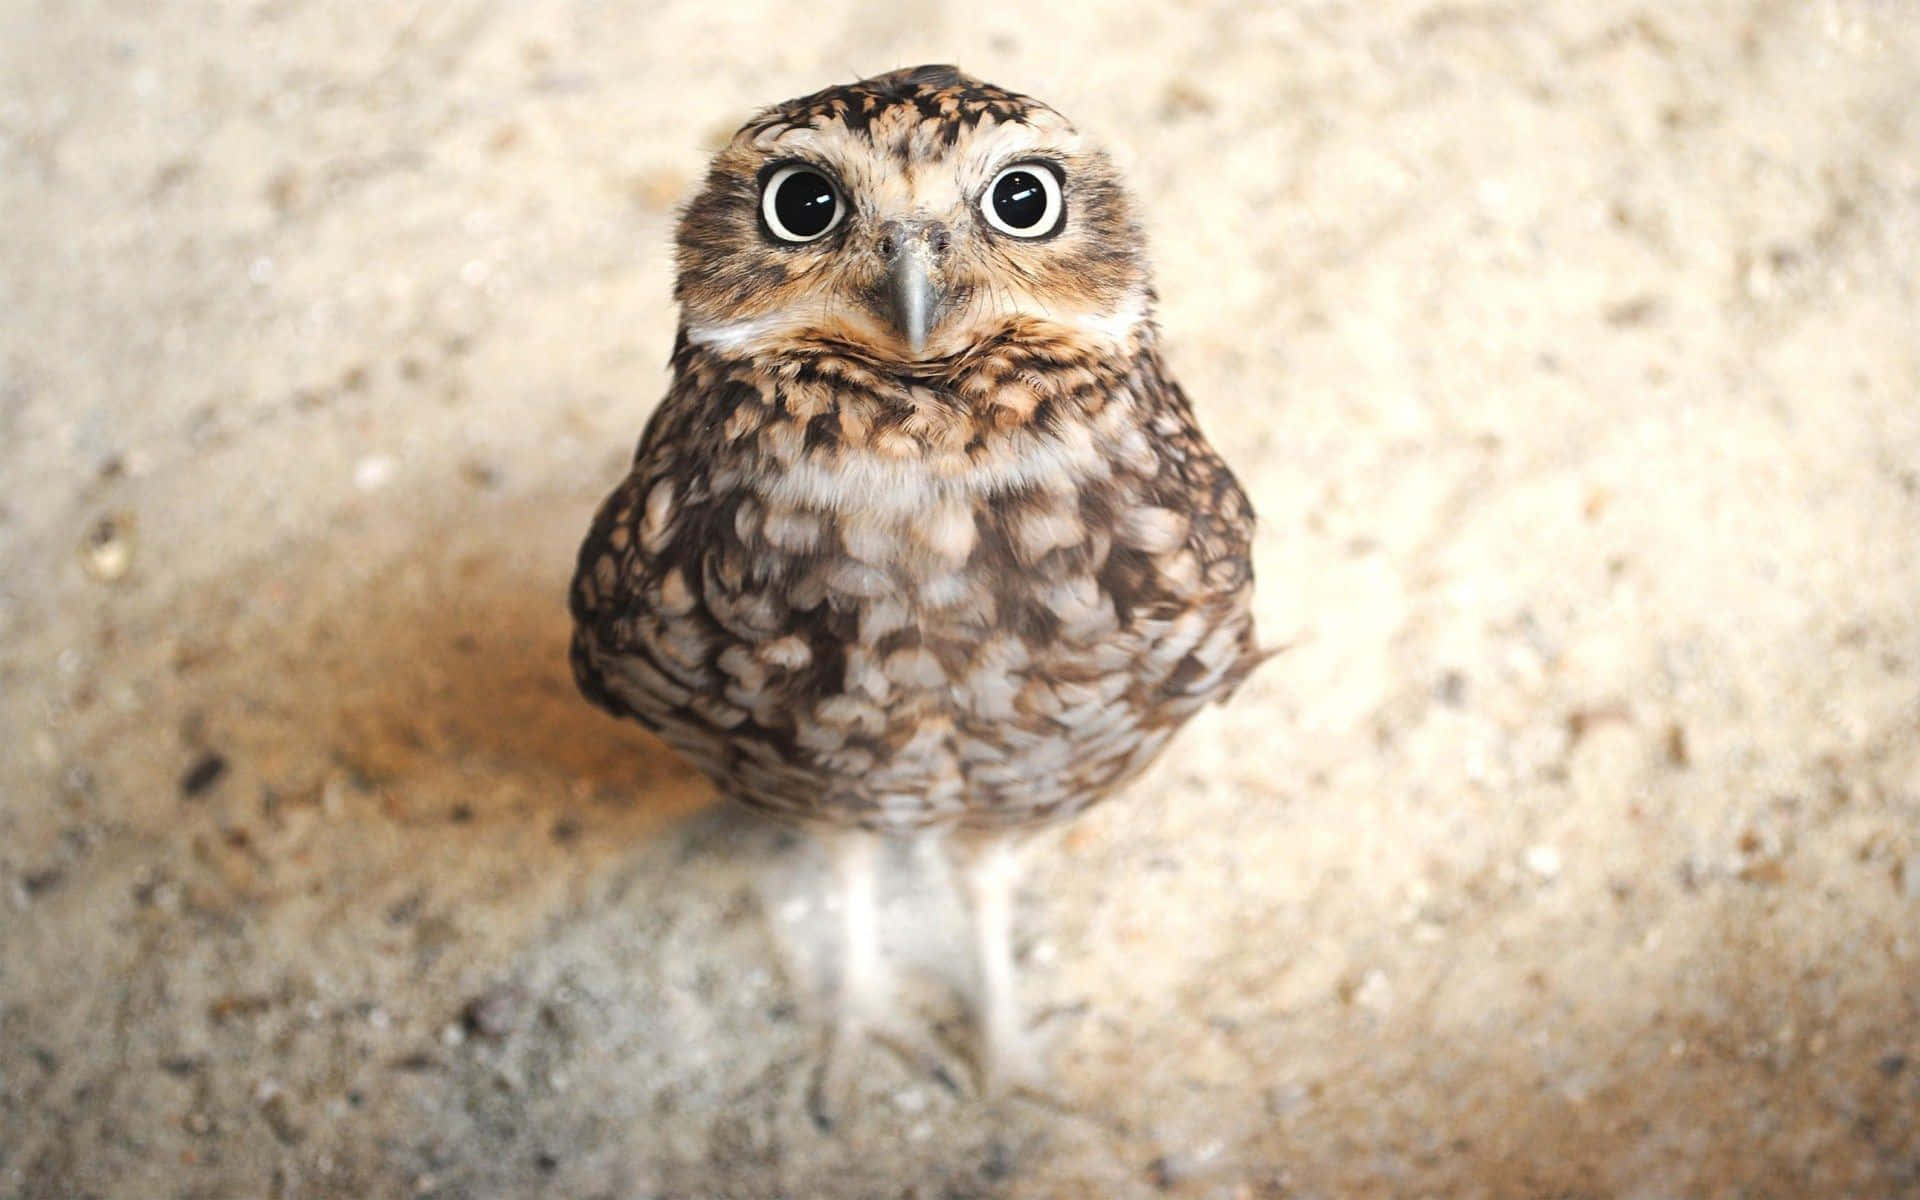 This Cute Owl Is Ready to Brighten Your Day